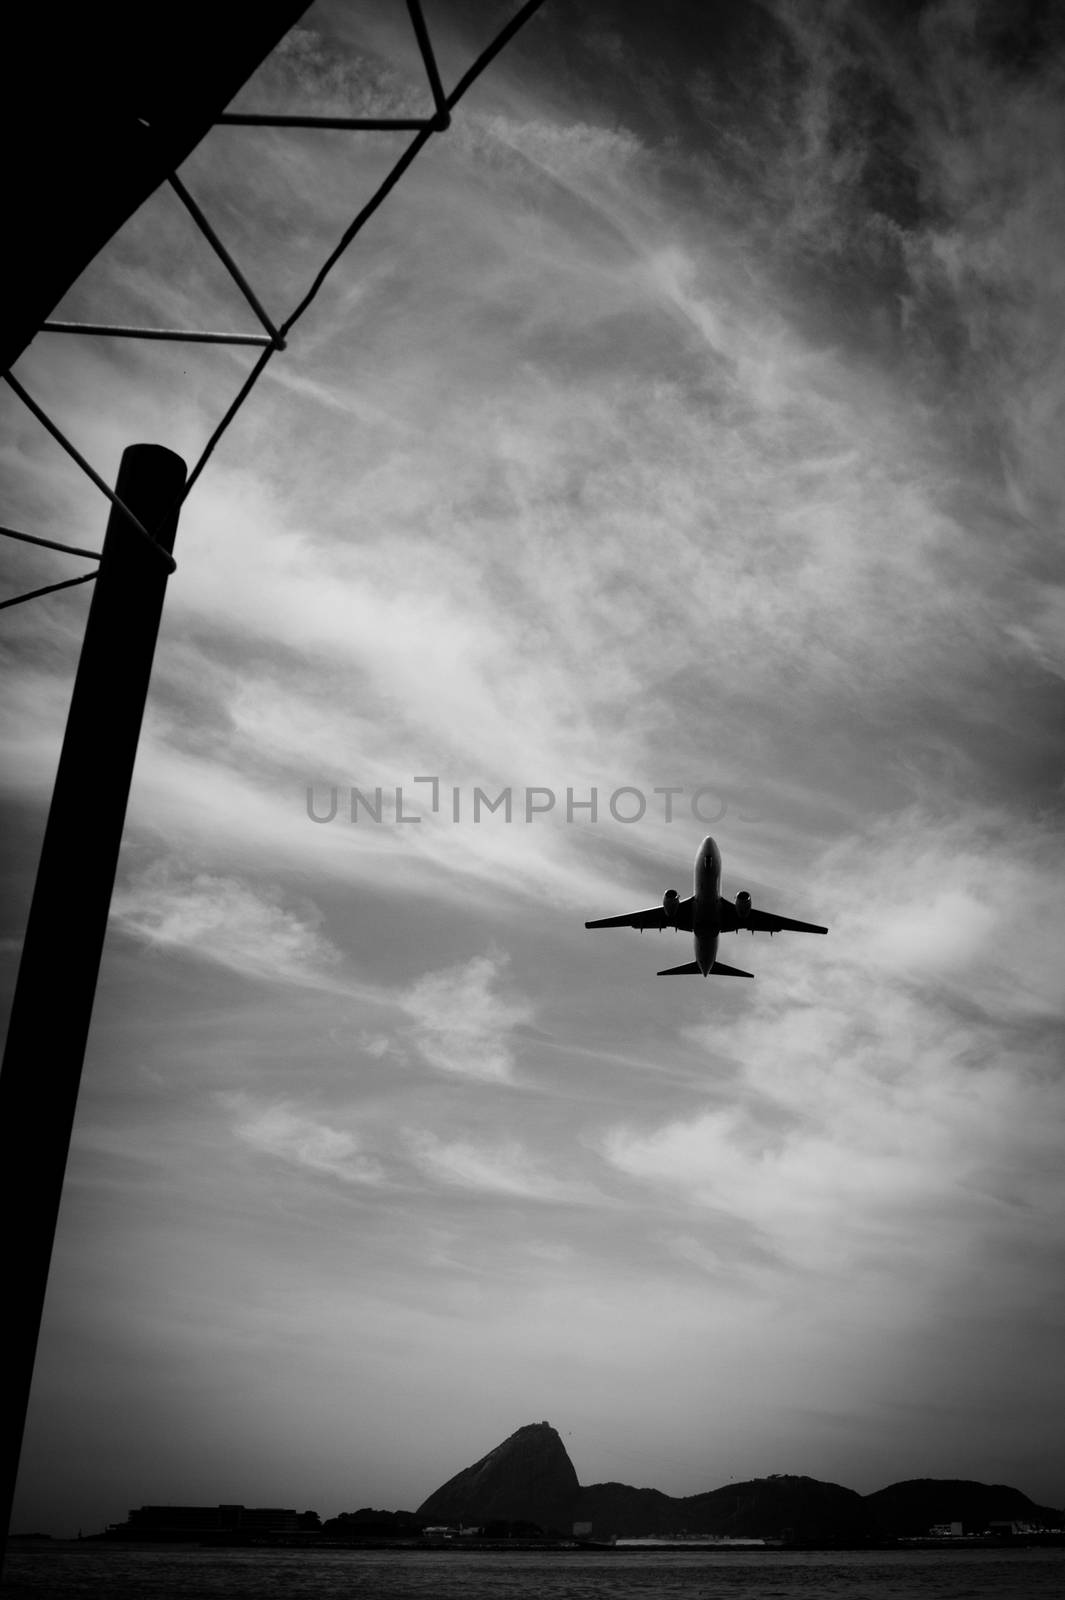 Airplane in flight over the city of Rio de Janeiro by CelsoDiniz